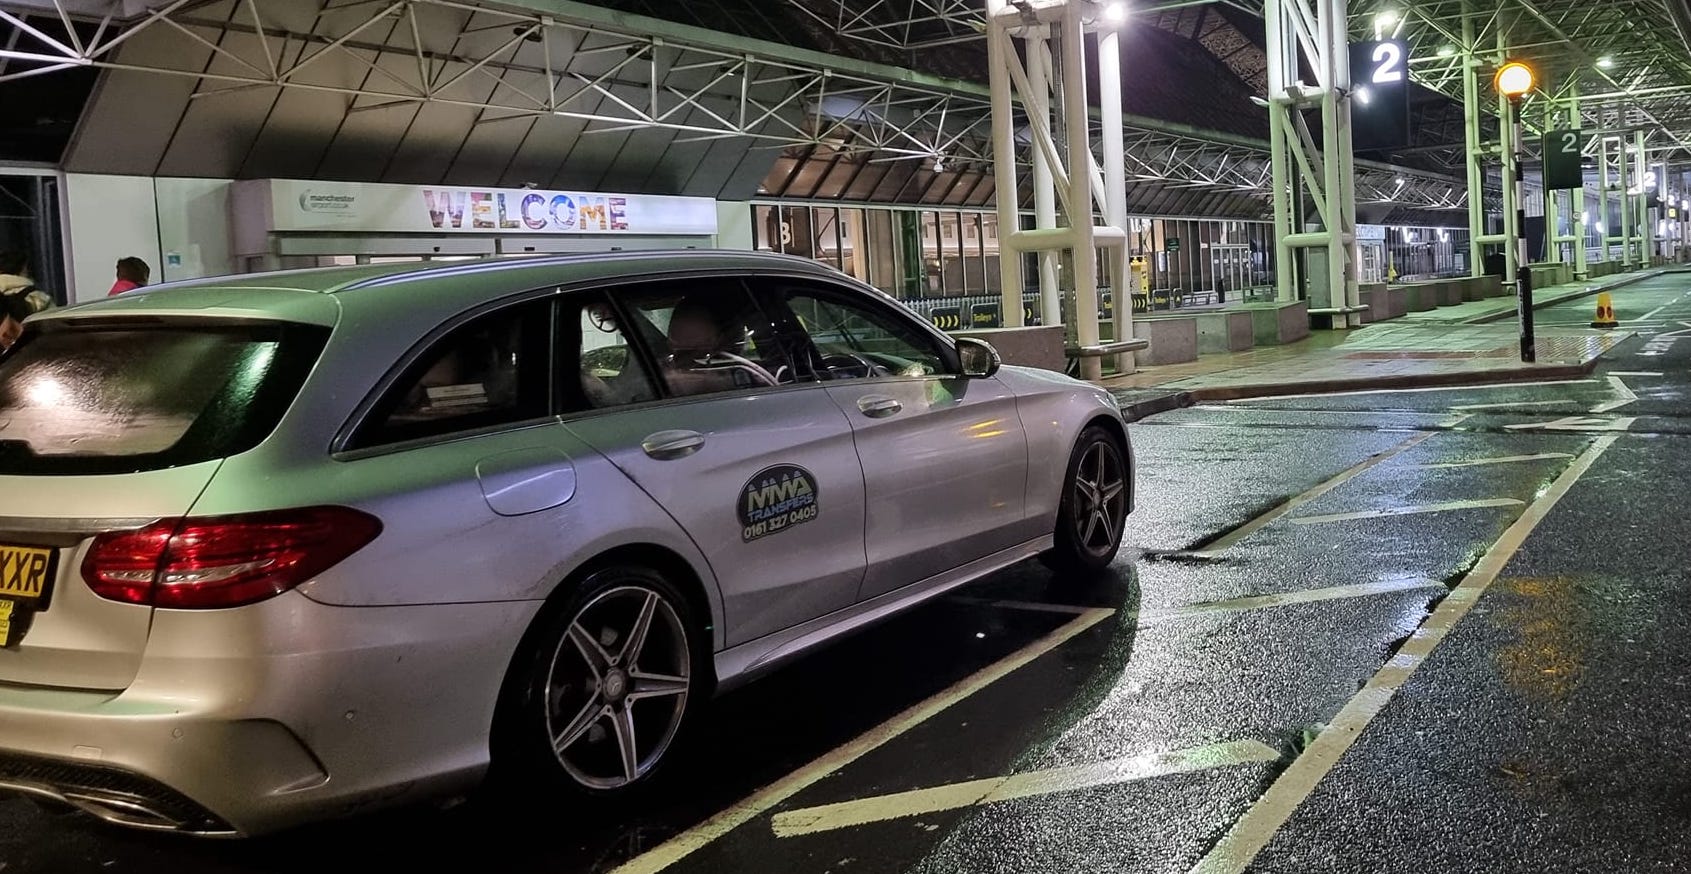 Take a Taxi from Manchester Airport to Sheffield with a free Meet and Greet Service